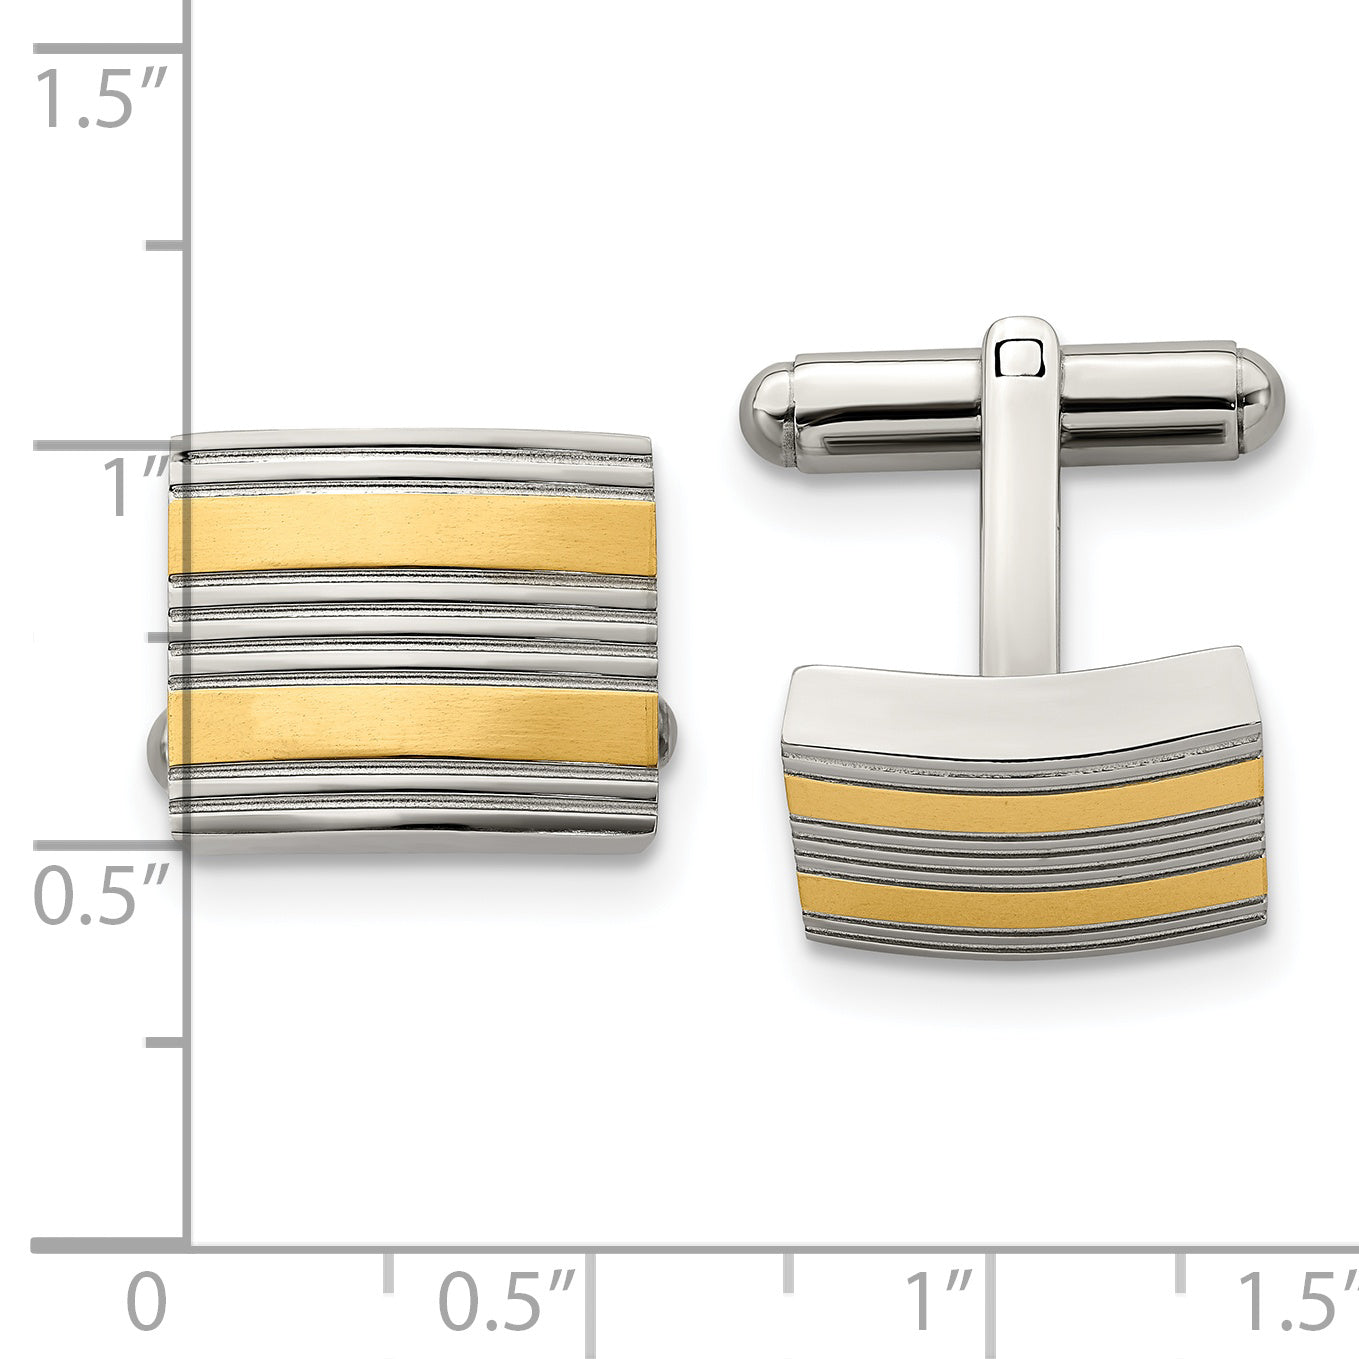 Chisel Stainless Steel Polished Yellow IP-plated Cufflinks